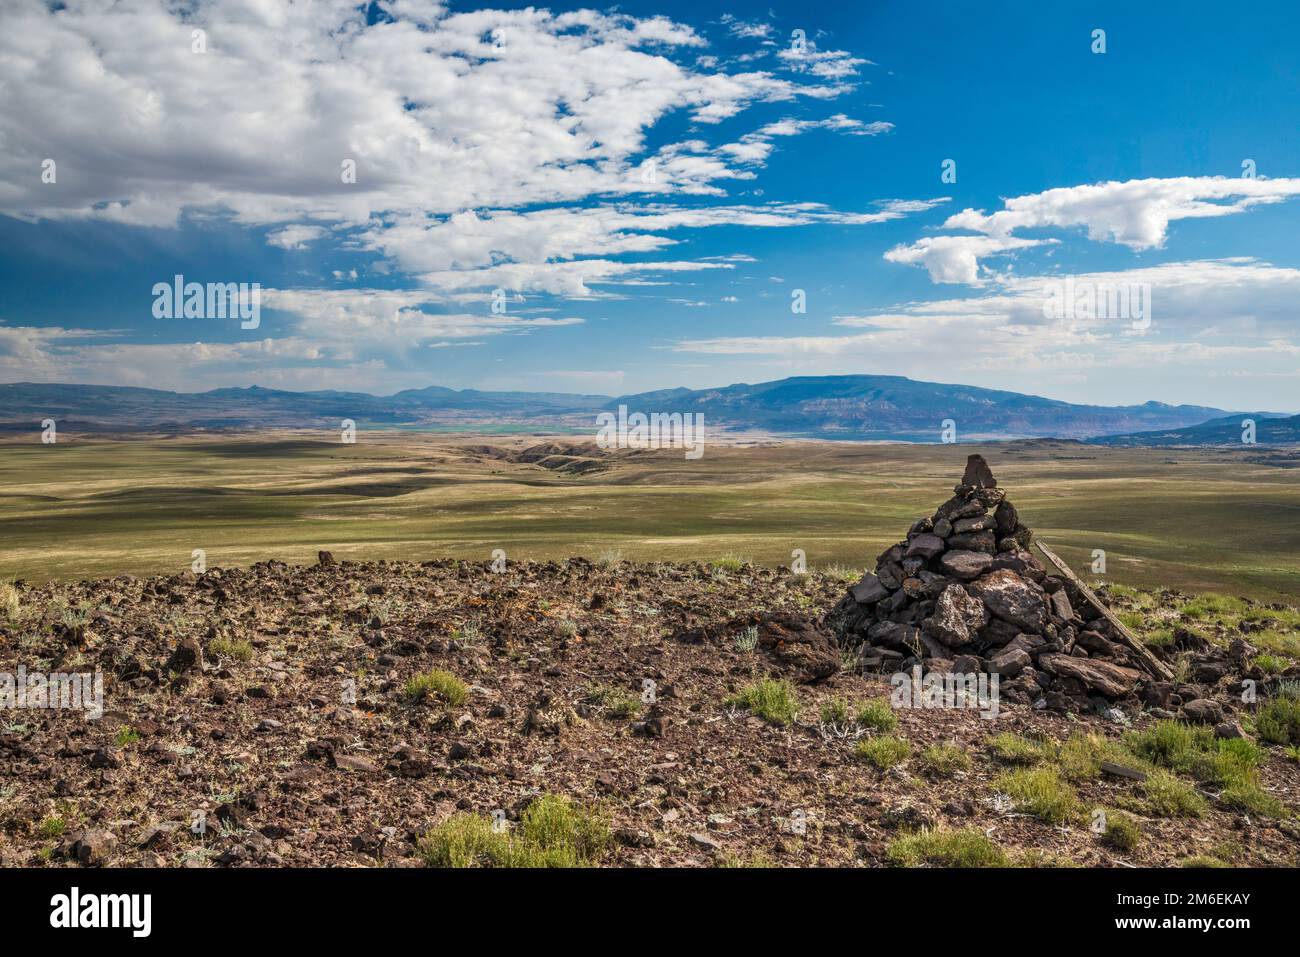 Rock cairn at Smooth Knoll, Fish Lake Mtns in distance, Awapa Plateau, Posey Lake Road (FR 154), near Bicknell, Utah, USA Stock Photo